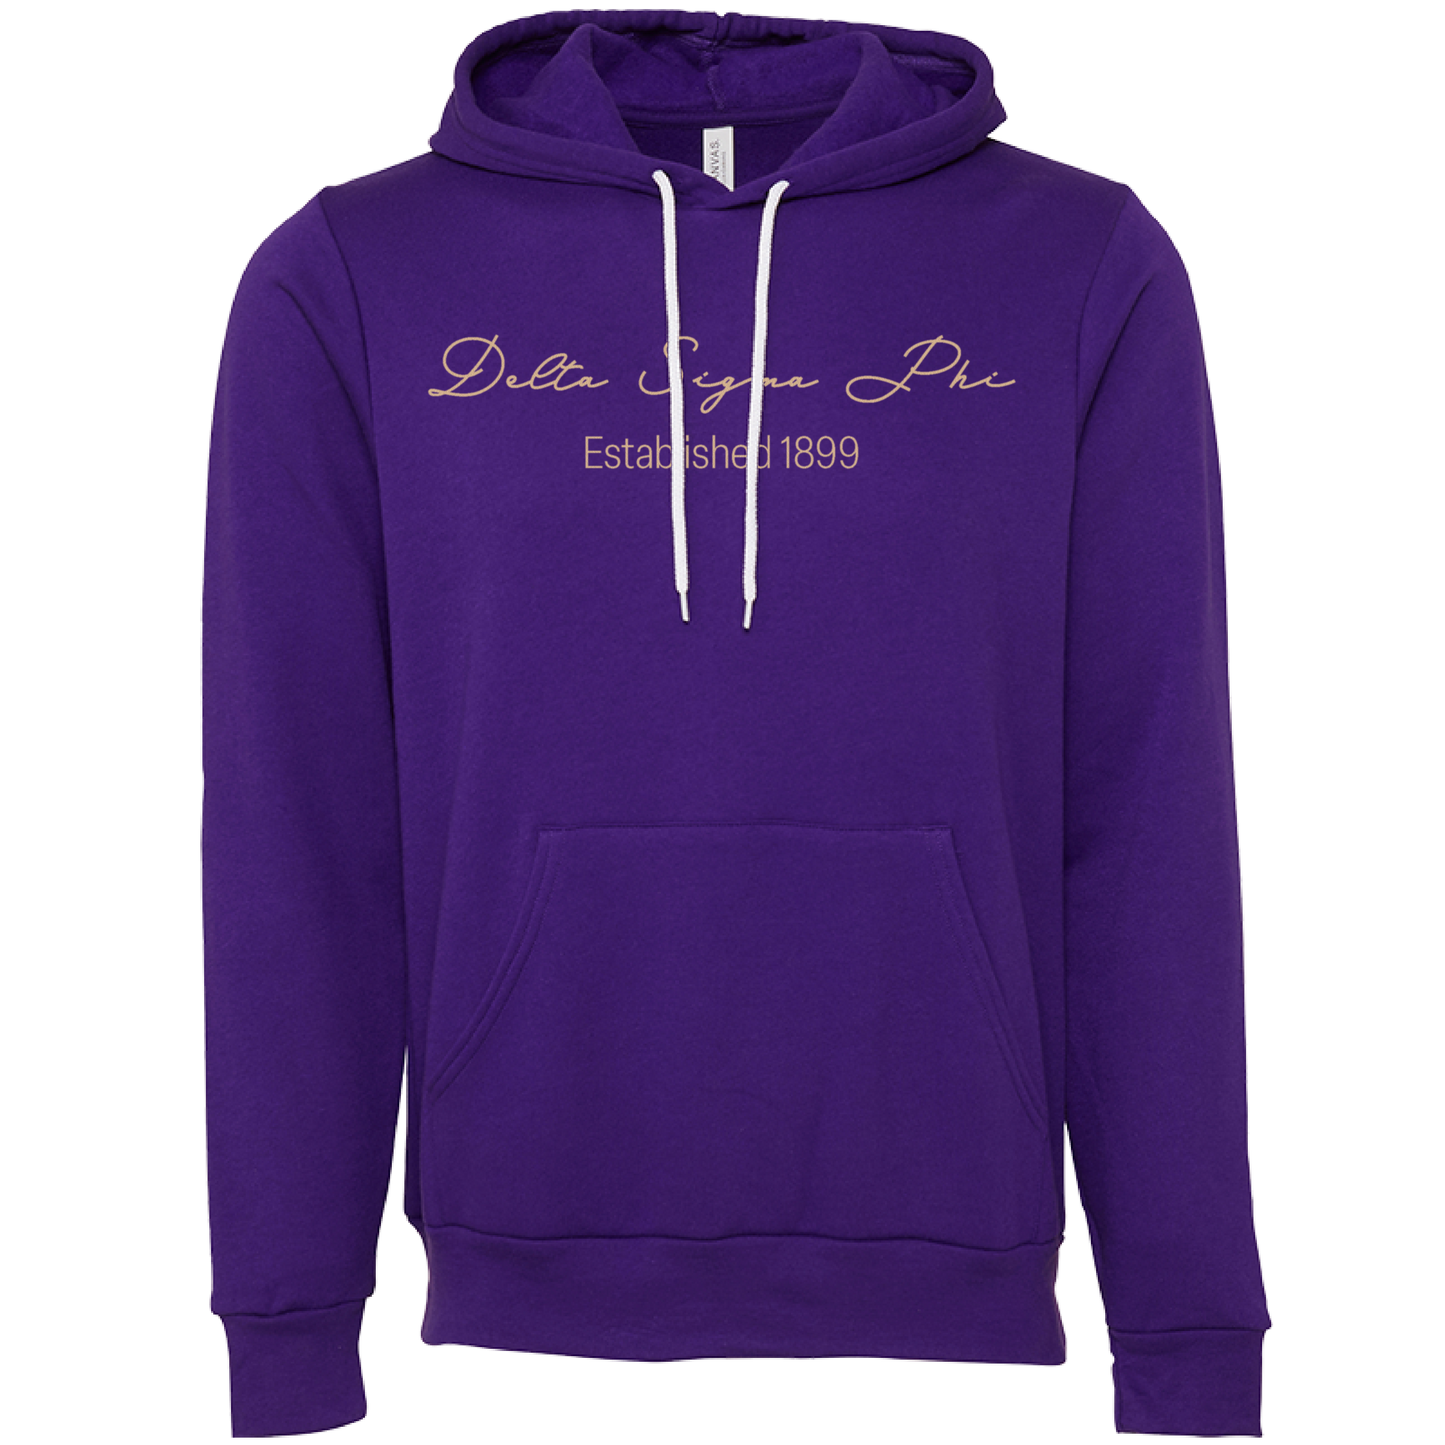 Delta Sigma Phi Embroidered Scripted Name Hooded Sweatshirts